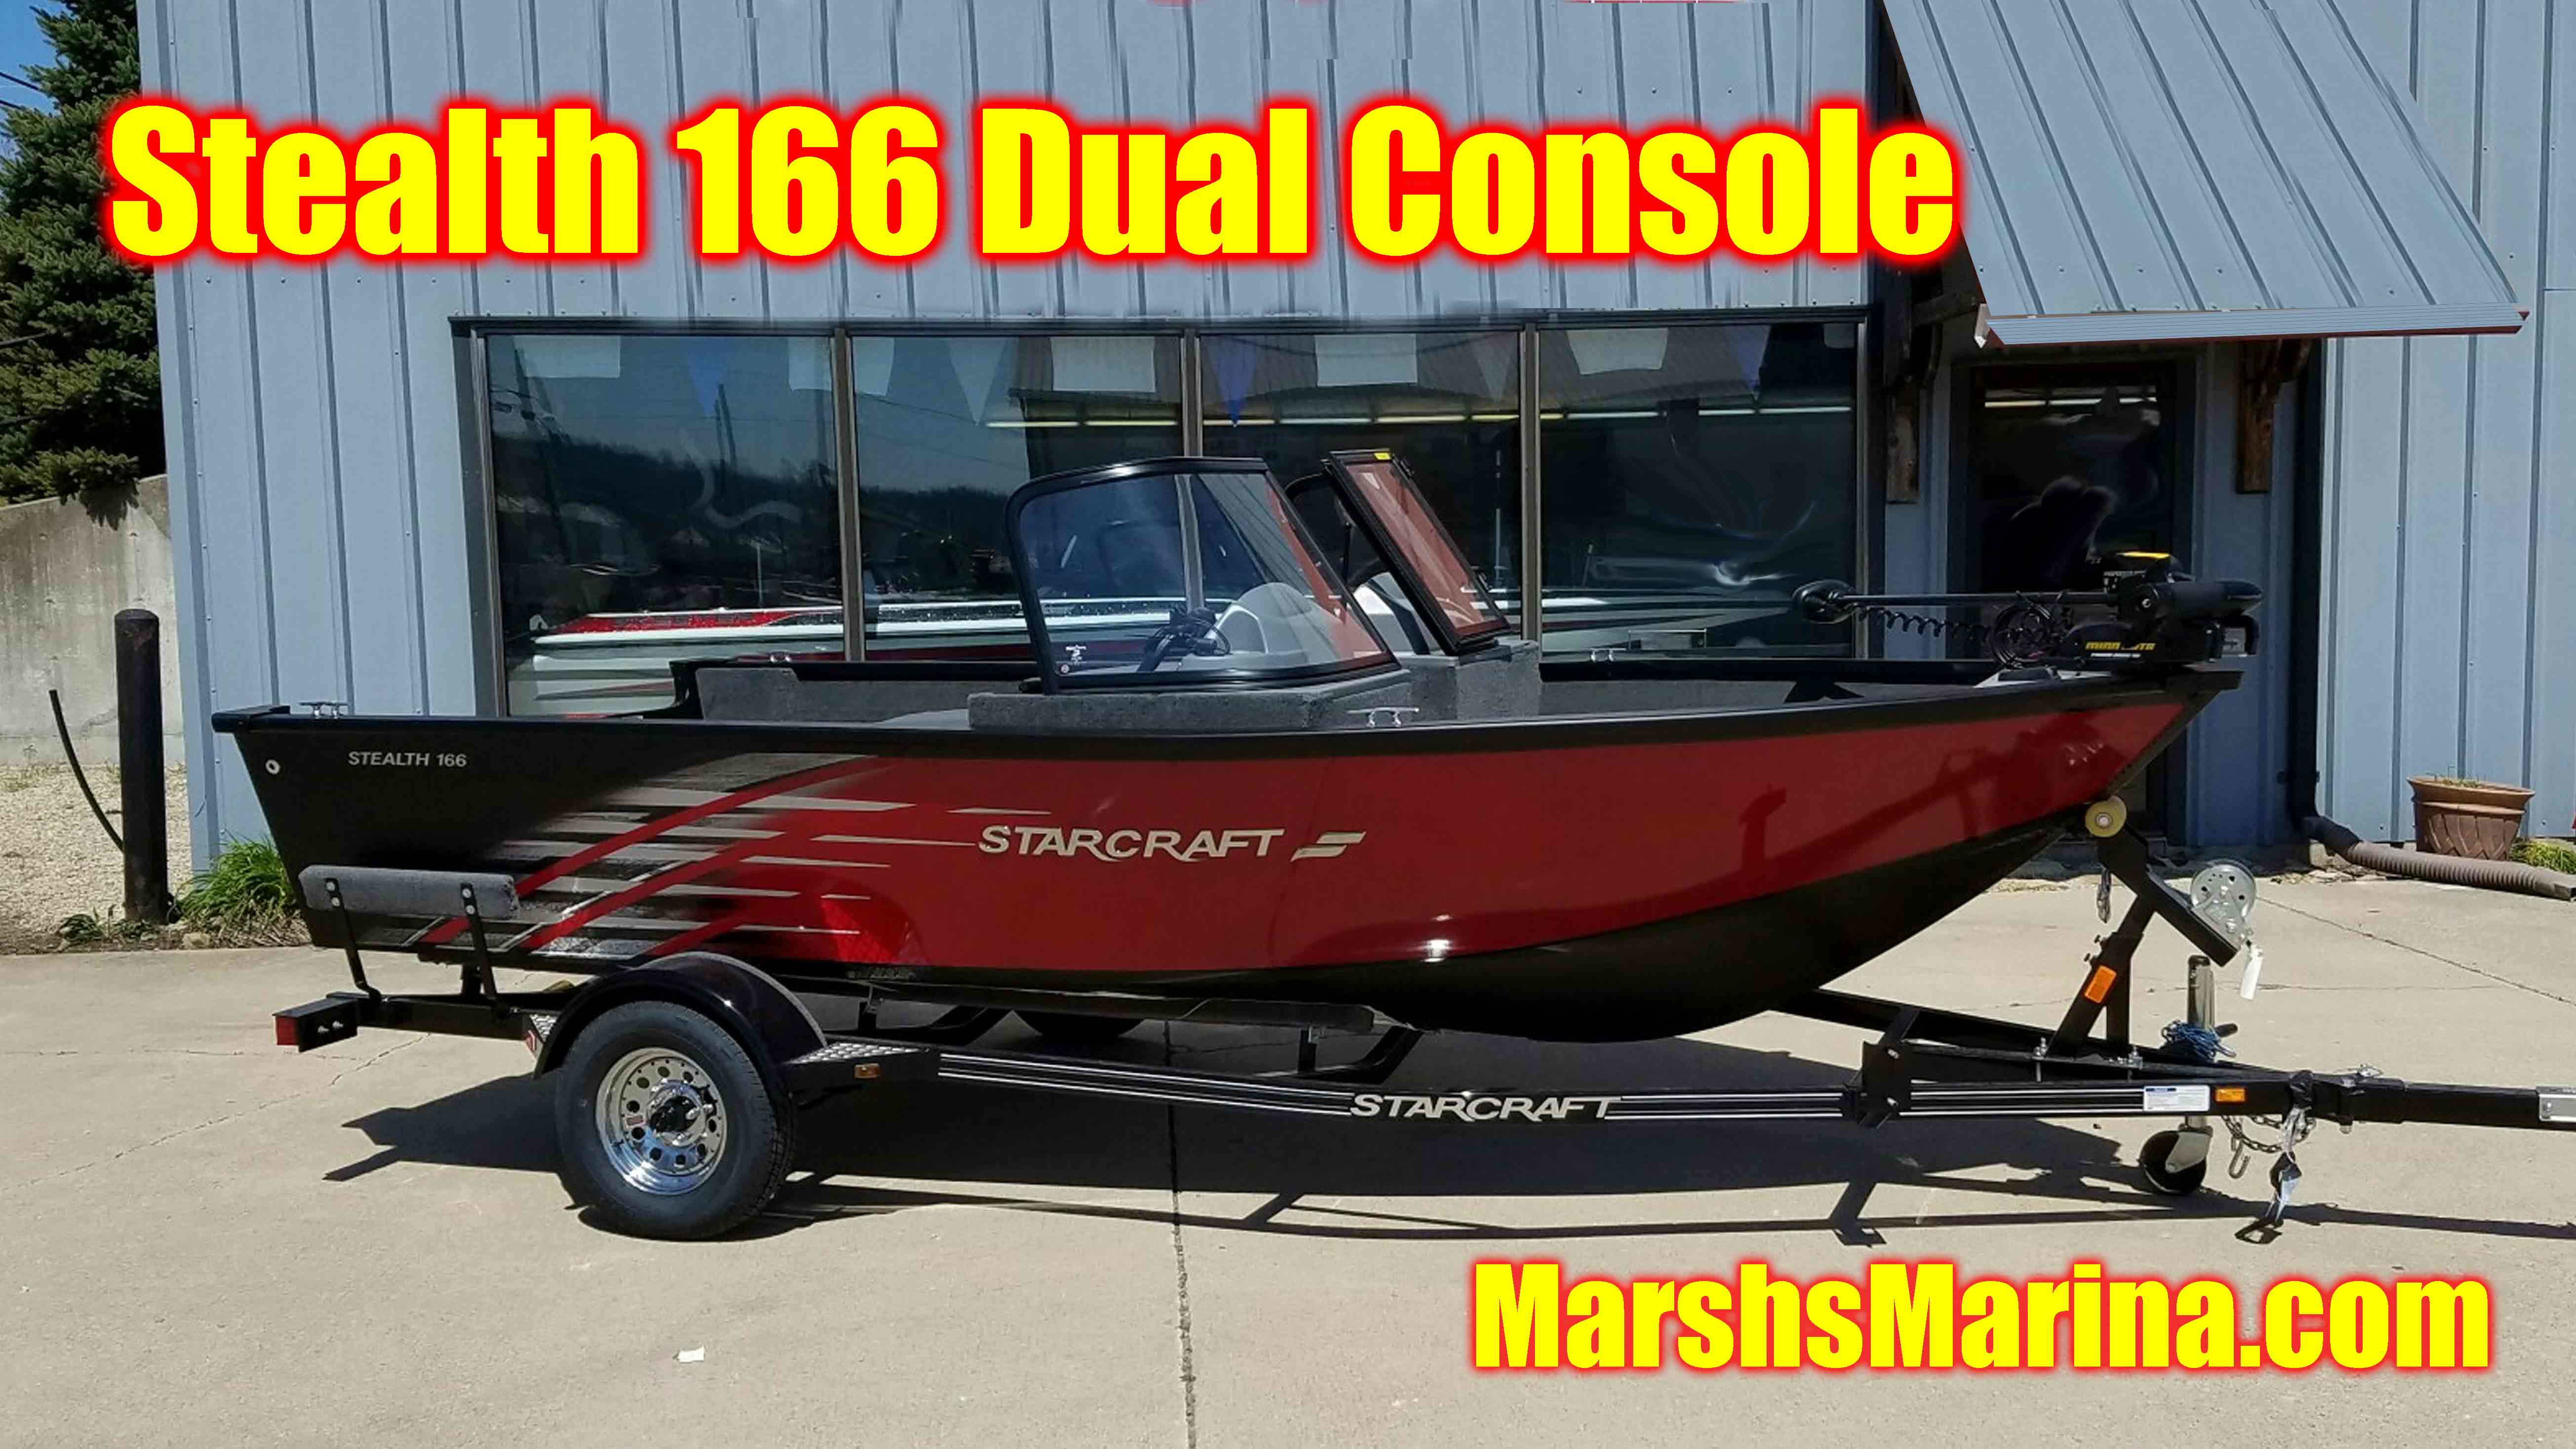 Stealth 166 Dual Console Fishing Boat